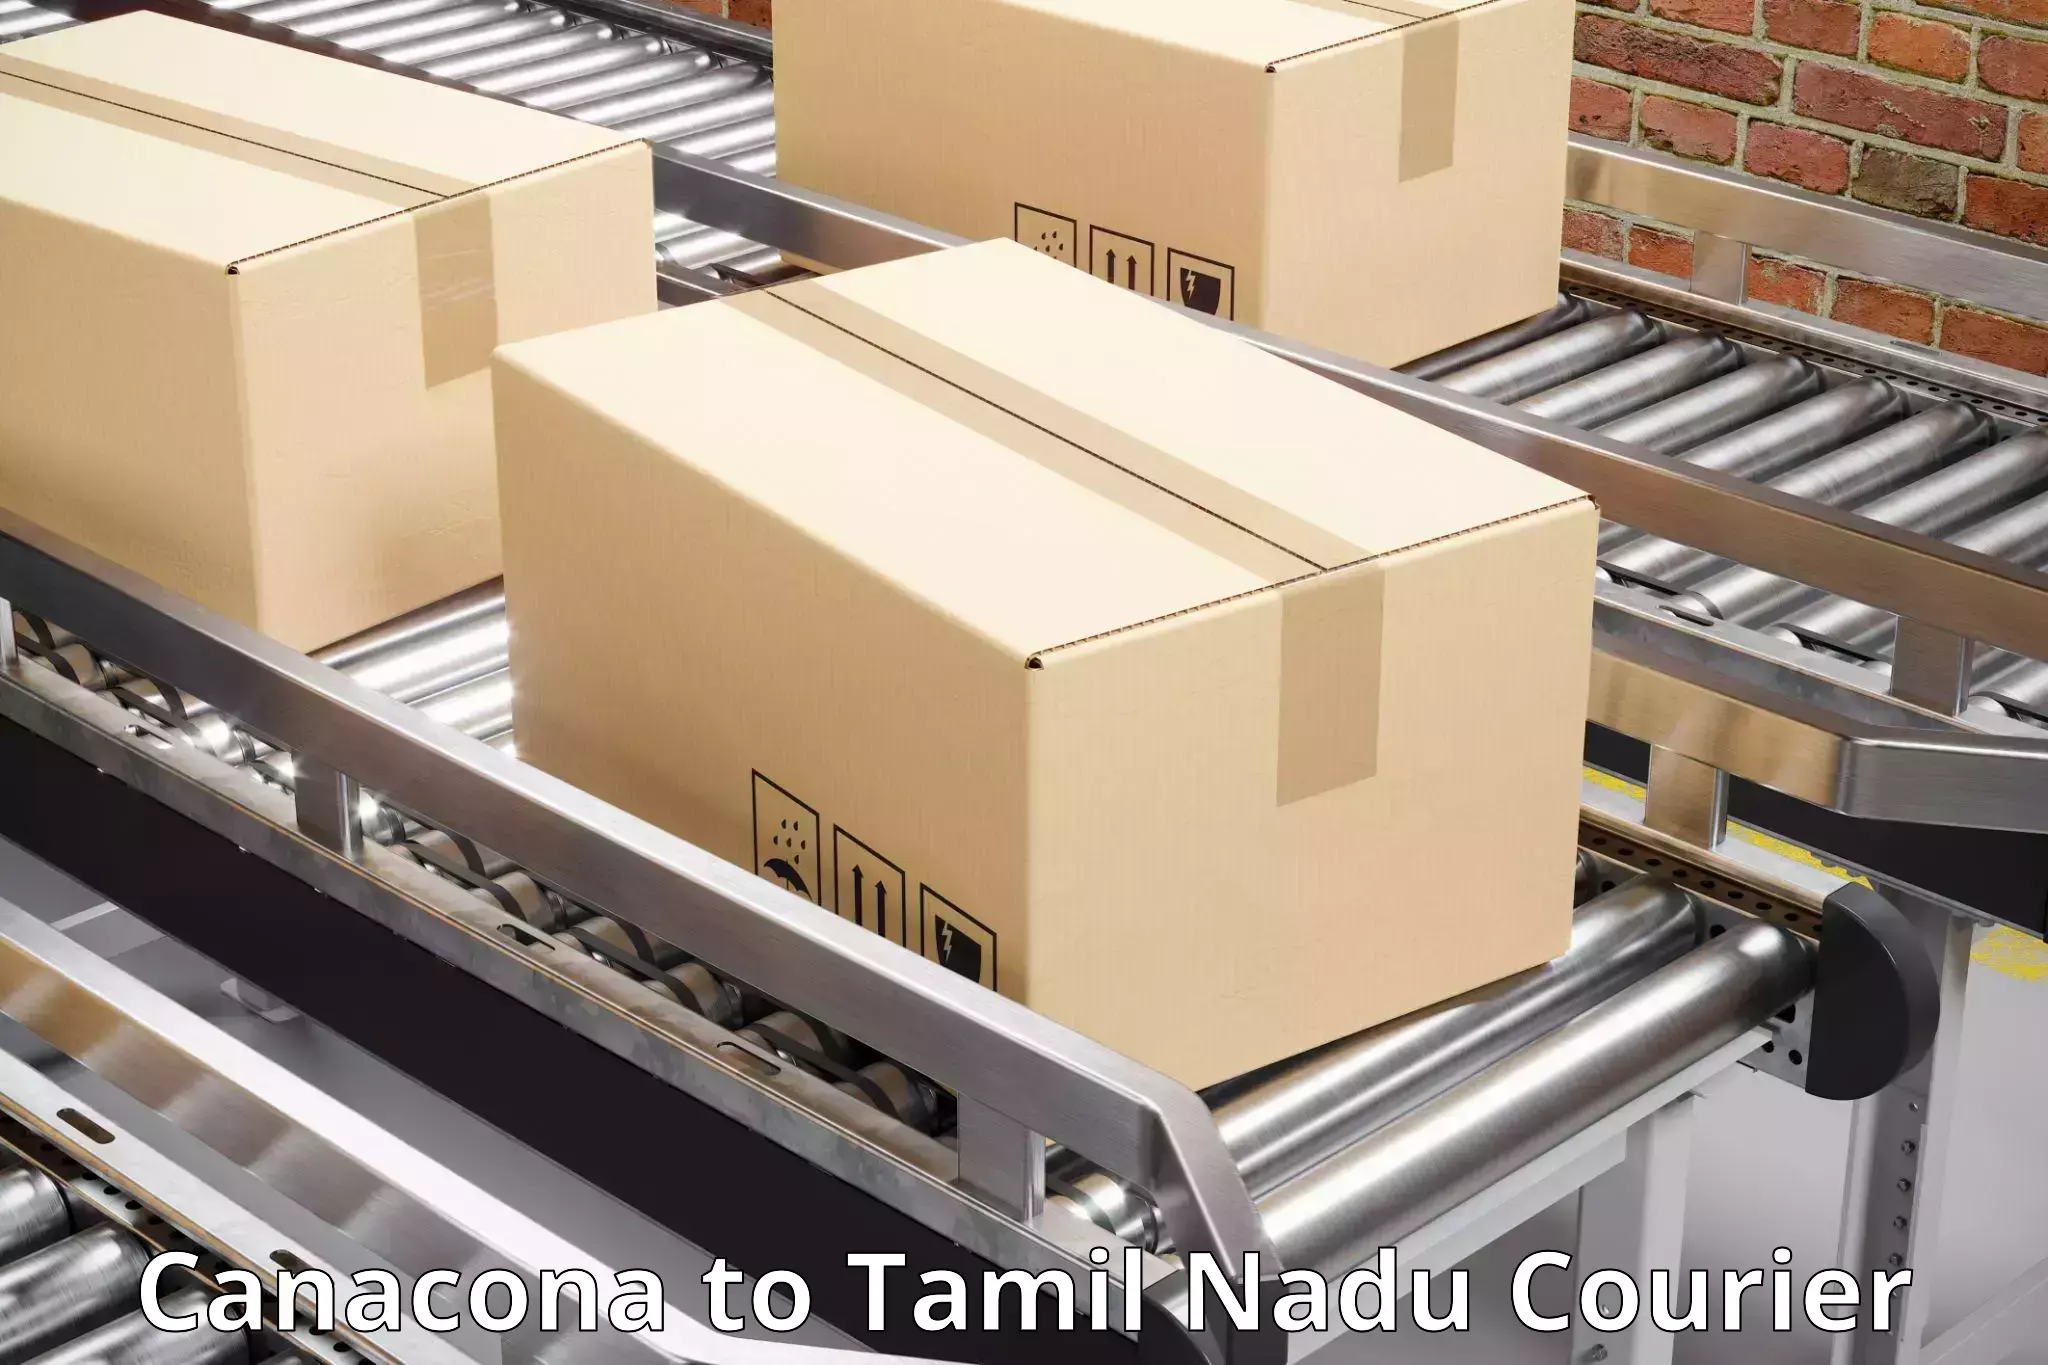 Parcel delivery automation Canacona to Tindivanam